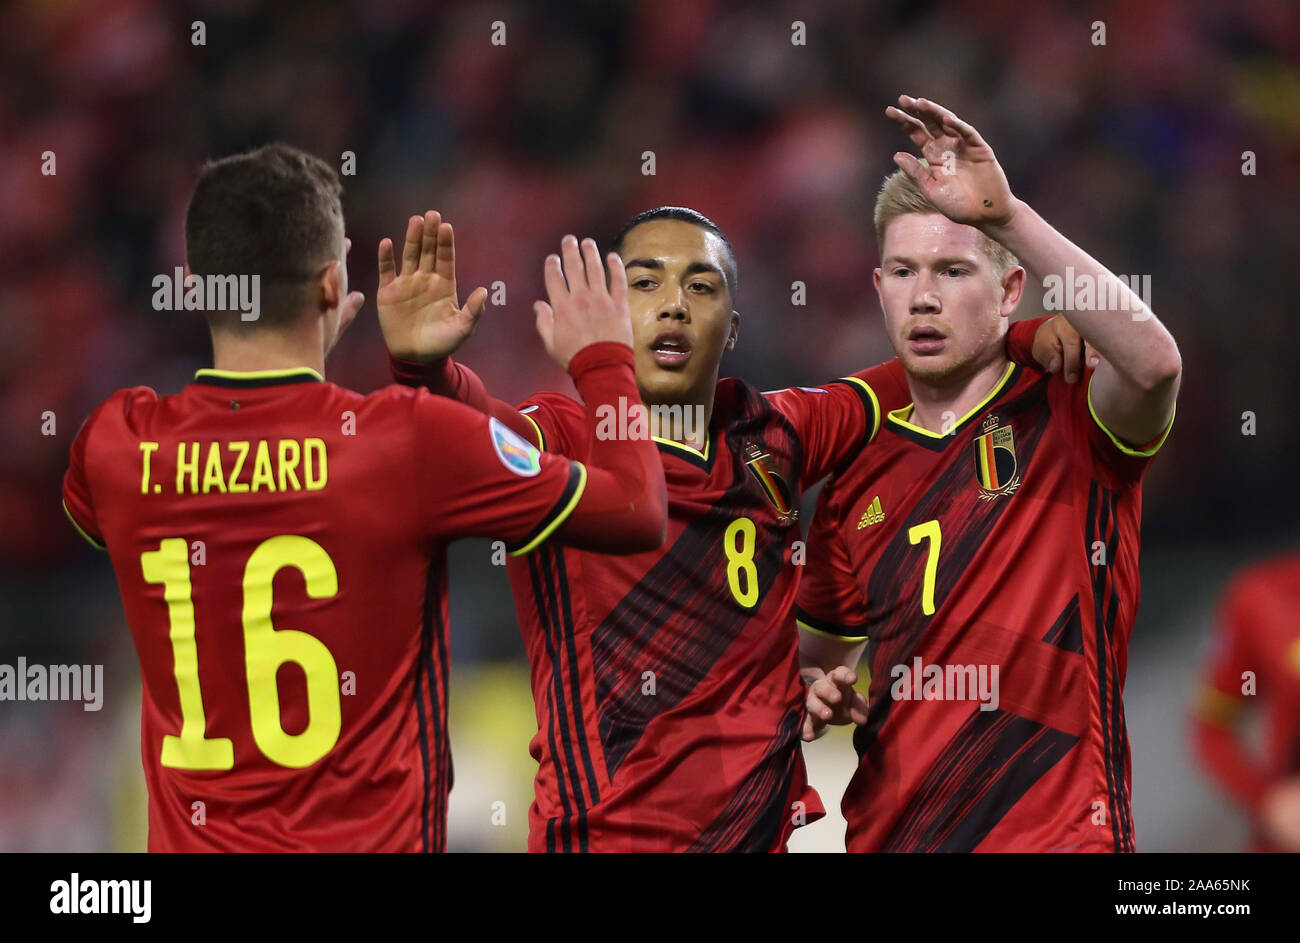 Brussels, Belgium. 19th Nov, 2019. Kevin De Bruyne of Belgium (R) celebrates with teammates during a UEFA Euro 2020 group I qualifying match between Belgium and Cyprus in Brussels, Belgium, Nov. 19, 2019. Credit: Zhang Cheng/Xinhua/Alamy Live News Stock Photo